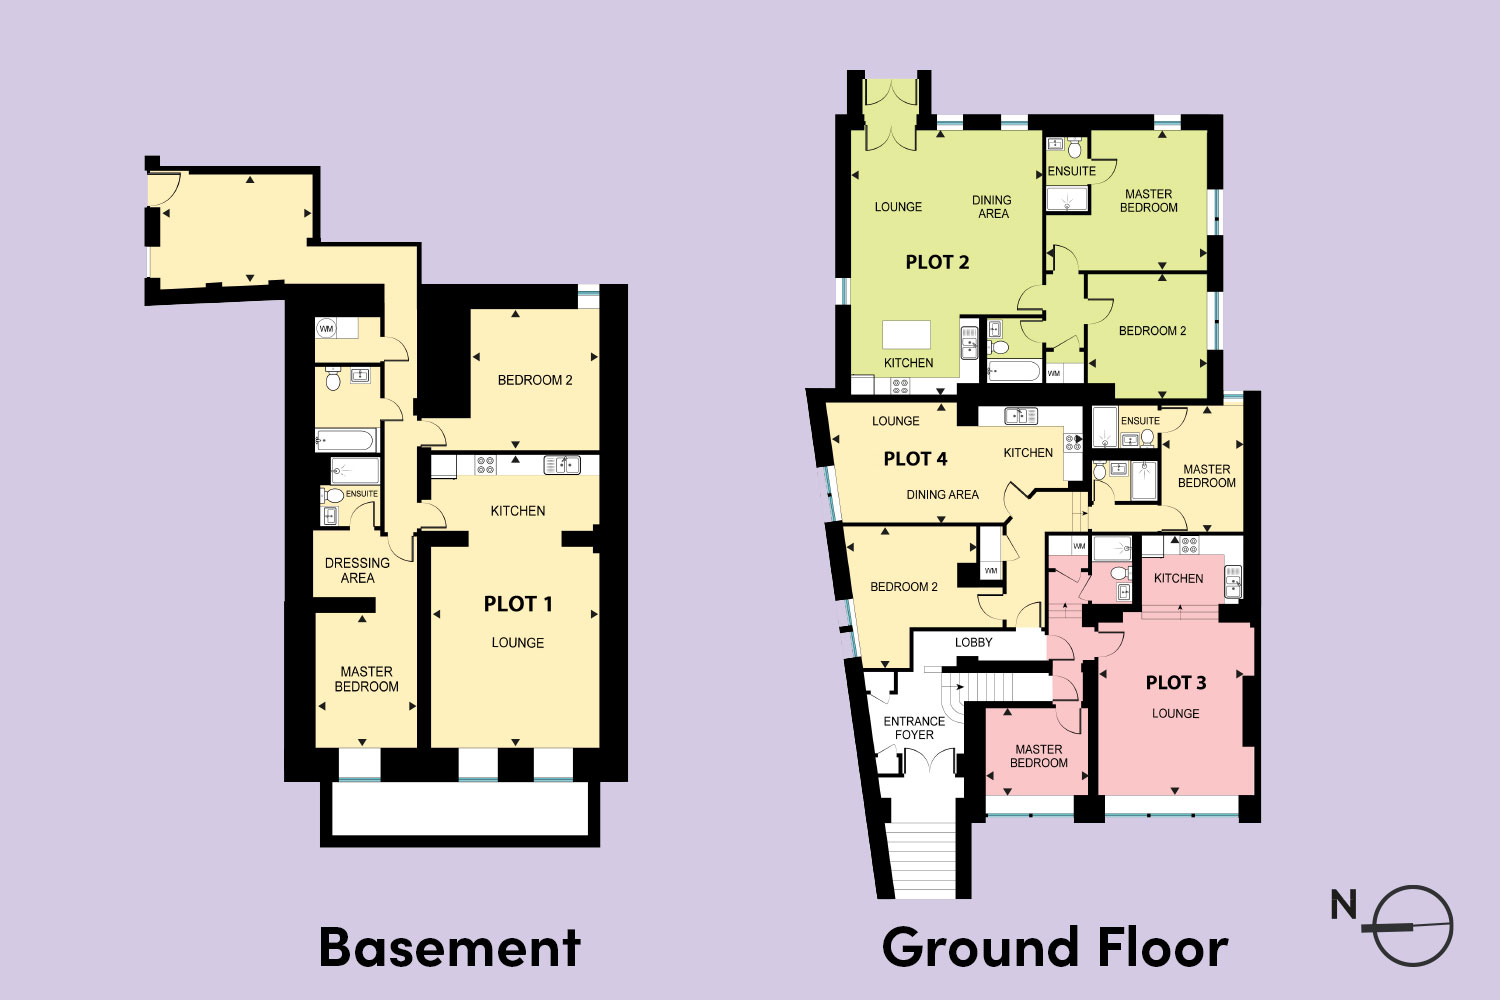 Basement and Ground floor plans